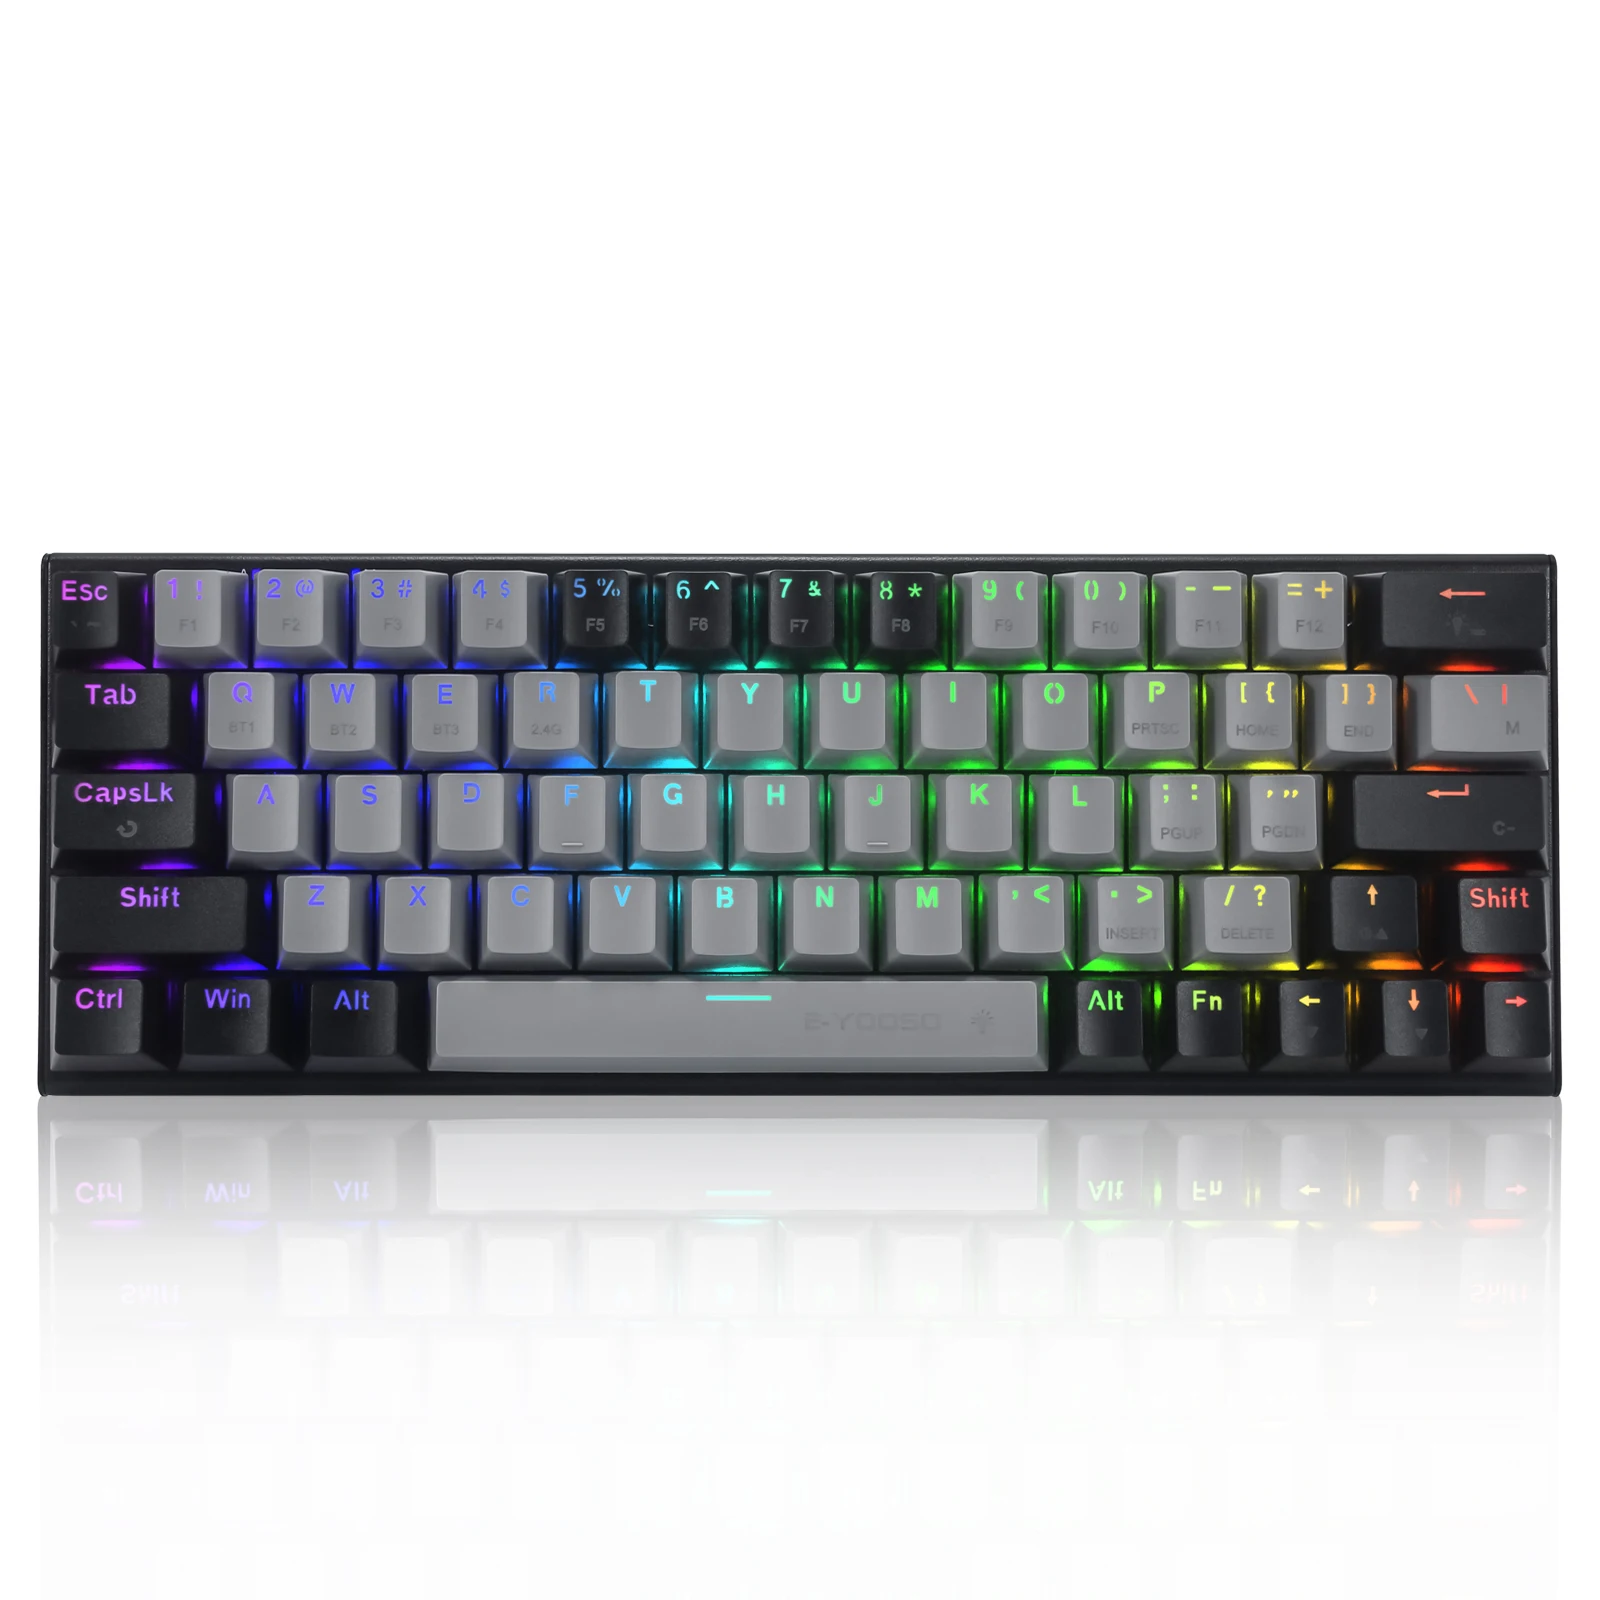 Enlarge HUOJI Z11 63keys RGB Mechanical Gaming Keyboard Surpport Bluetooth/Wireless 2.4G/USB 3 mode with Red switch for PC,Laptop,Mac OS